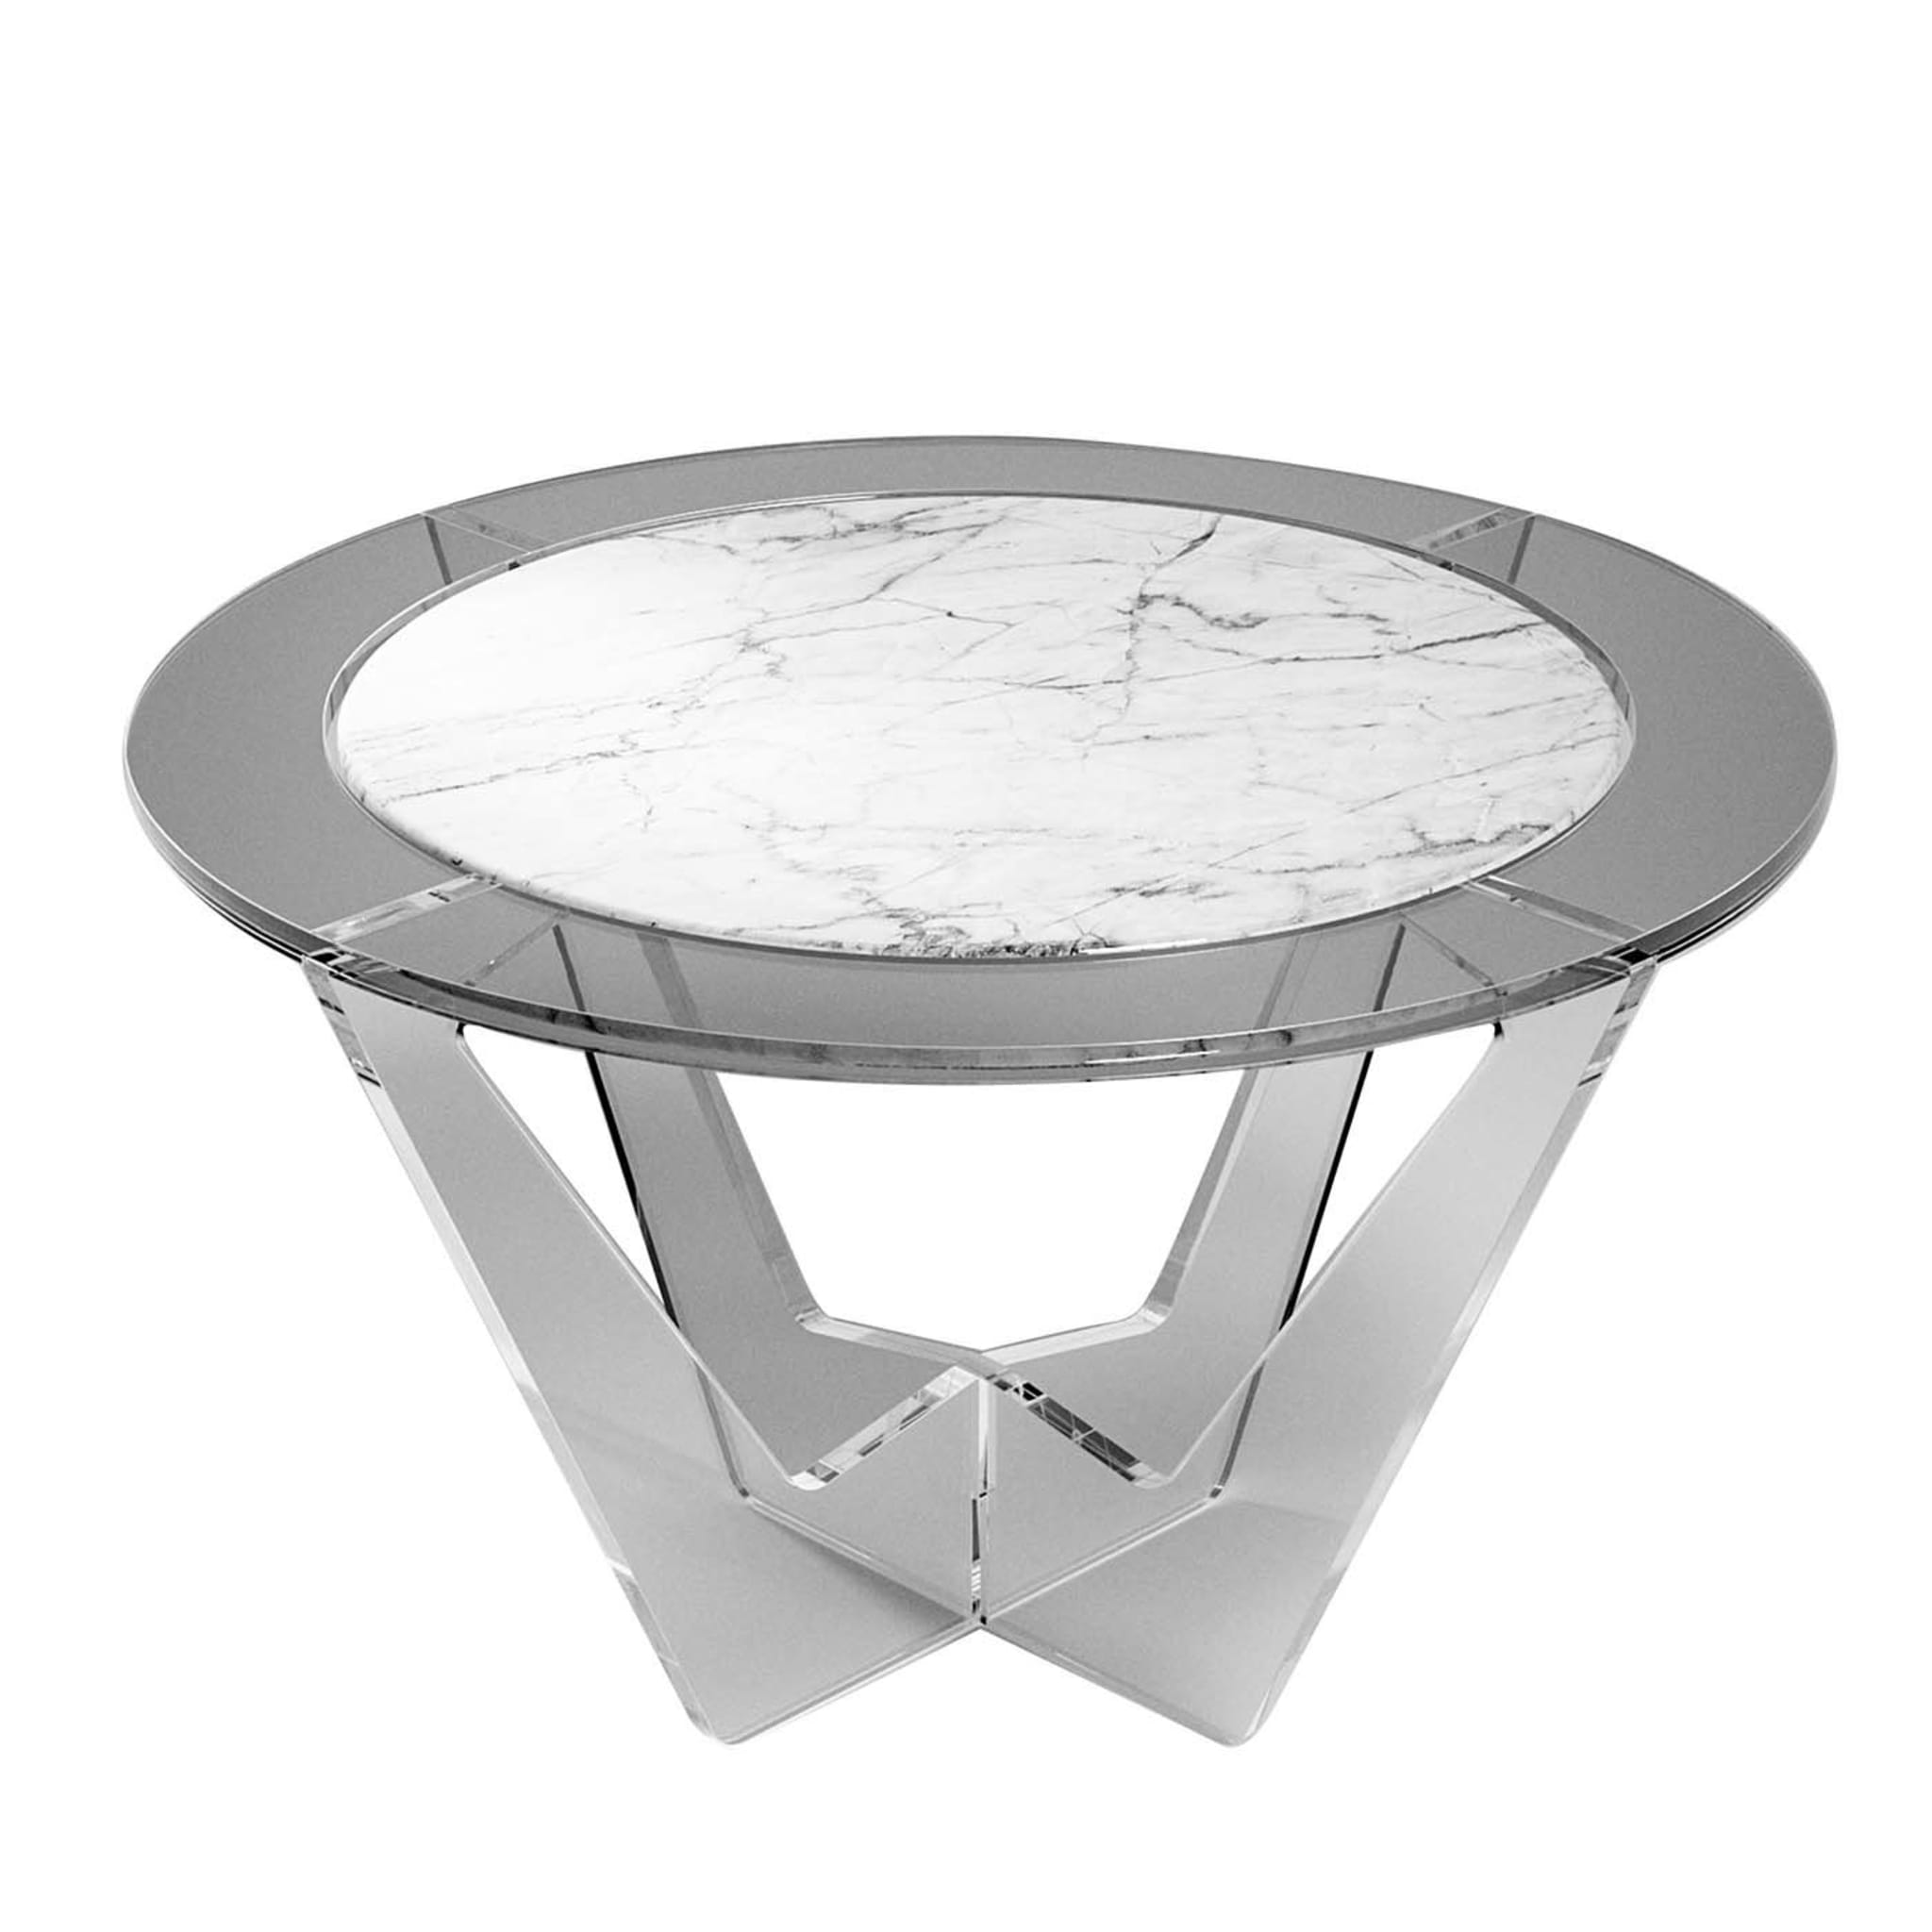 Hac Gray Round Coffee Table with White Carrara Marble Top - Main view